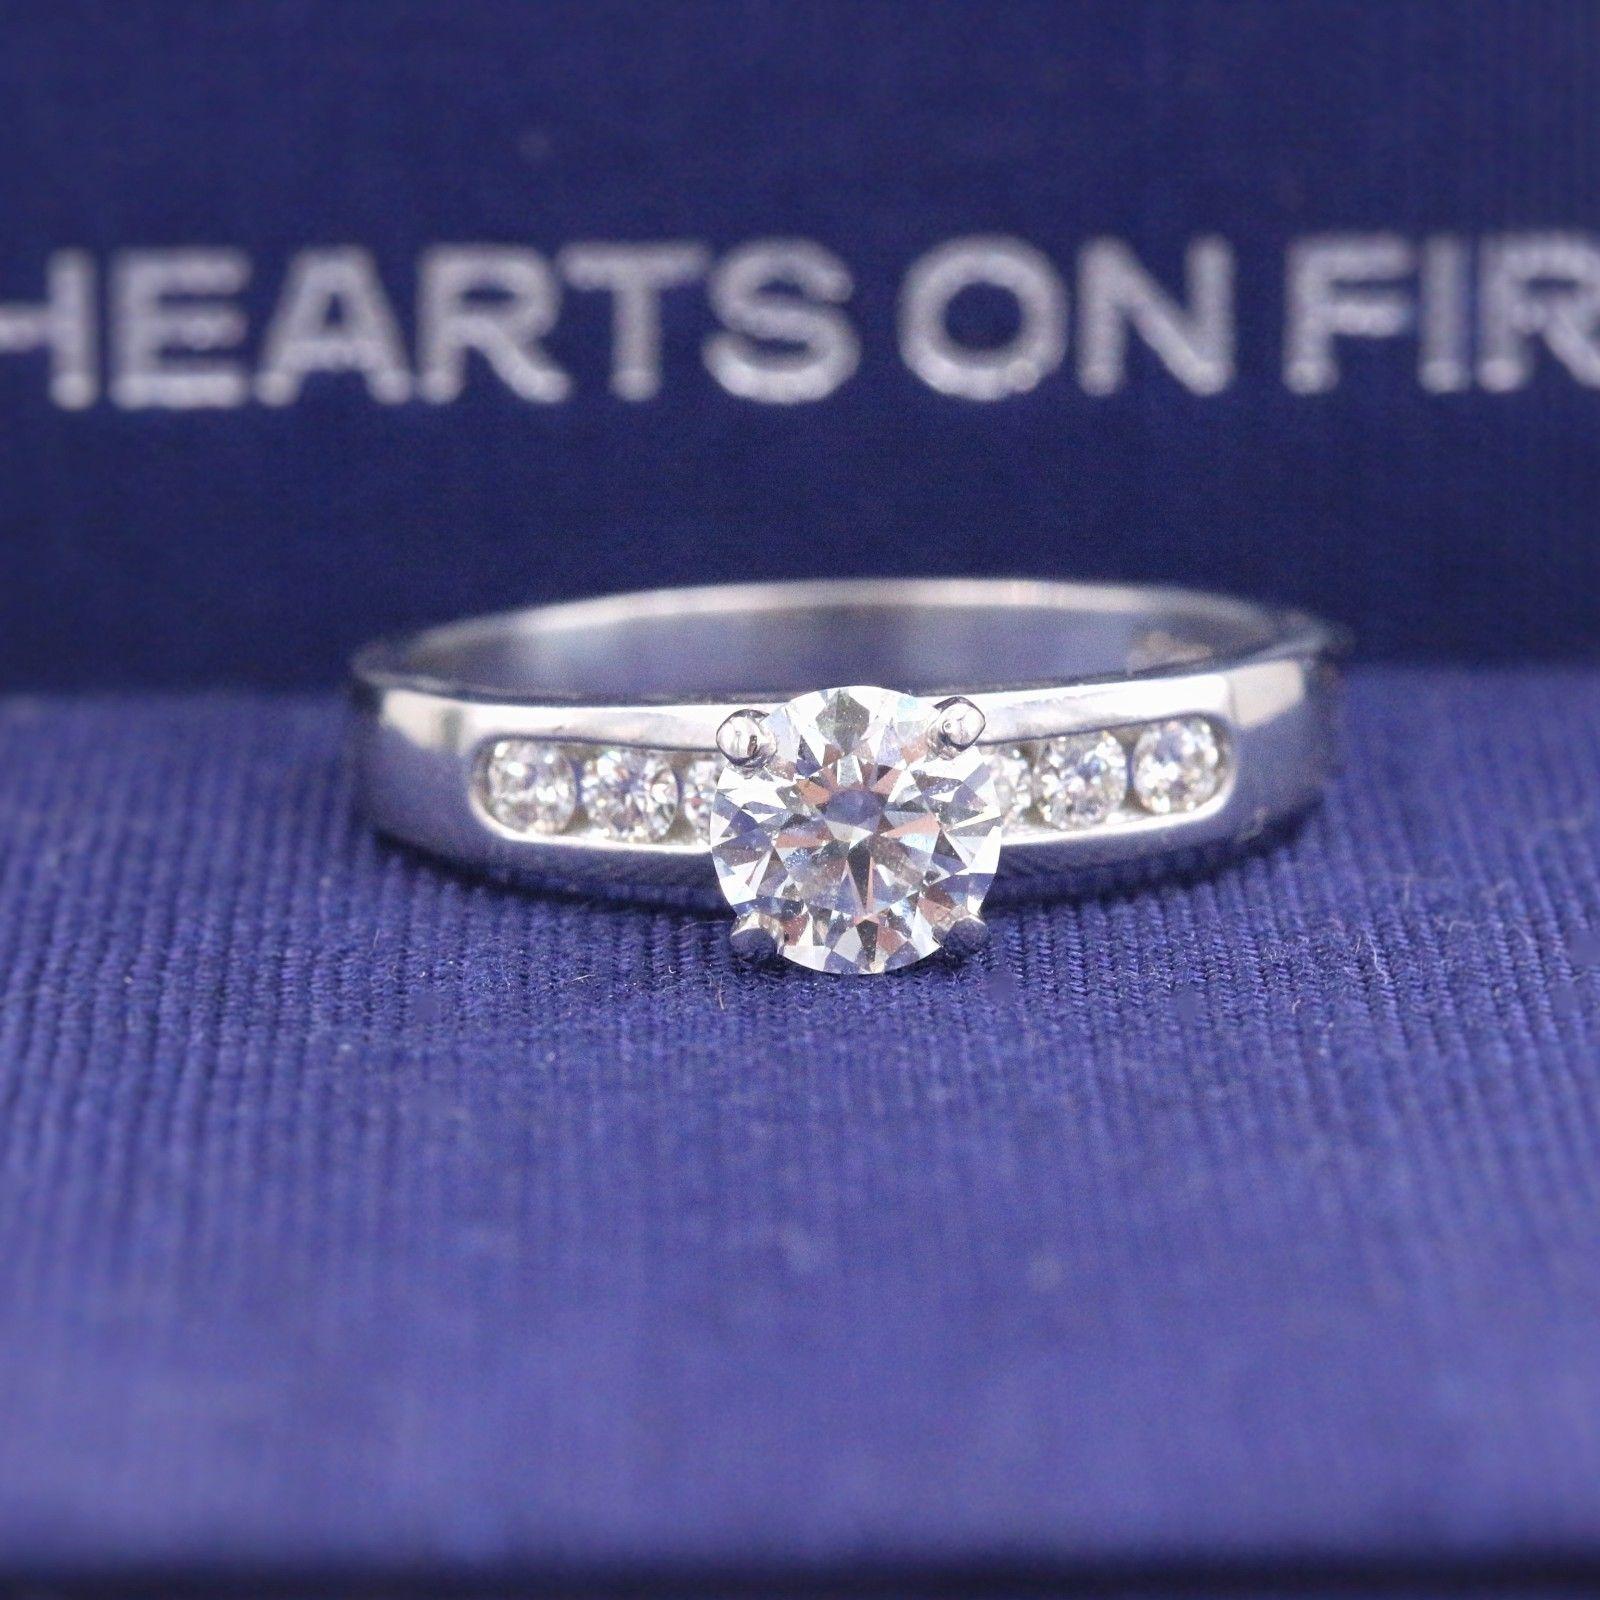 HEARTS ON FIRE
Style:  Seven-Stone Diamond Engagement Ring
Metal:  18k White Gold with Platinum Prongs
Size:  6.75 - sizable
Total Carat Weight:  0.795 tcw
Diamond Shape:  Round Brilliant Diamond 0.615 cts
Diamond Color & Clarity:  I / VS2
Accent